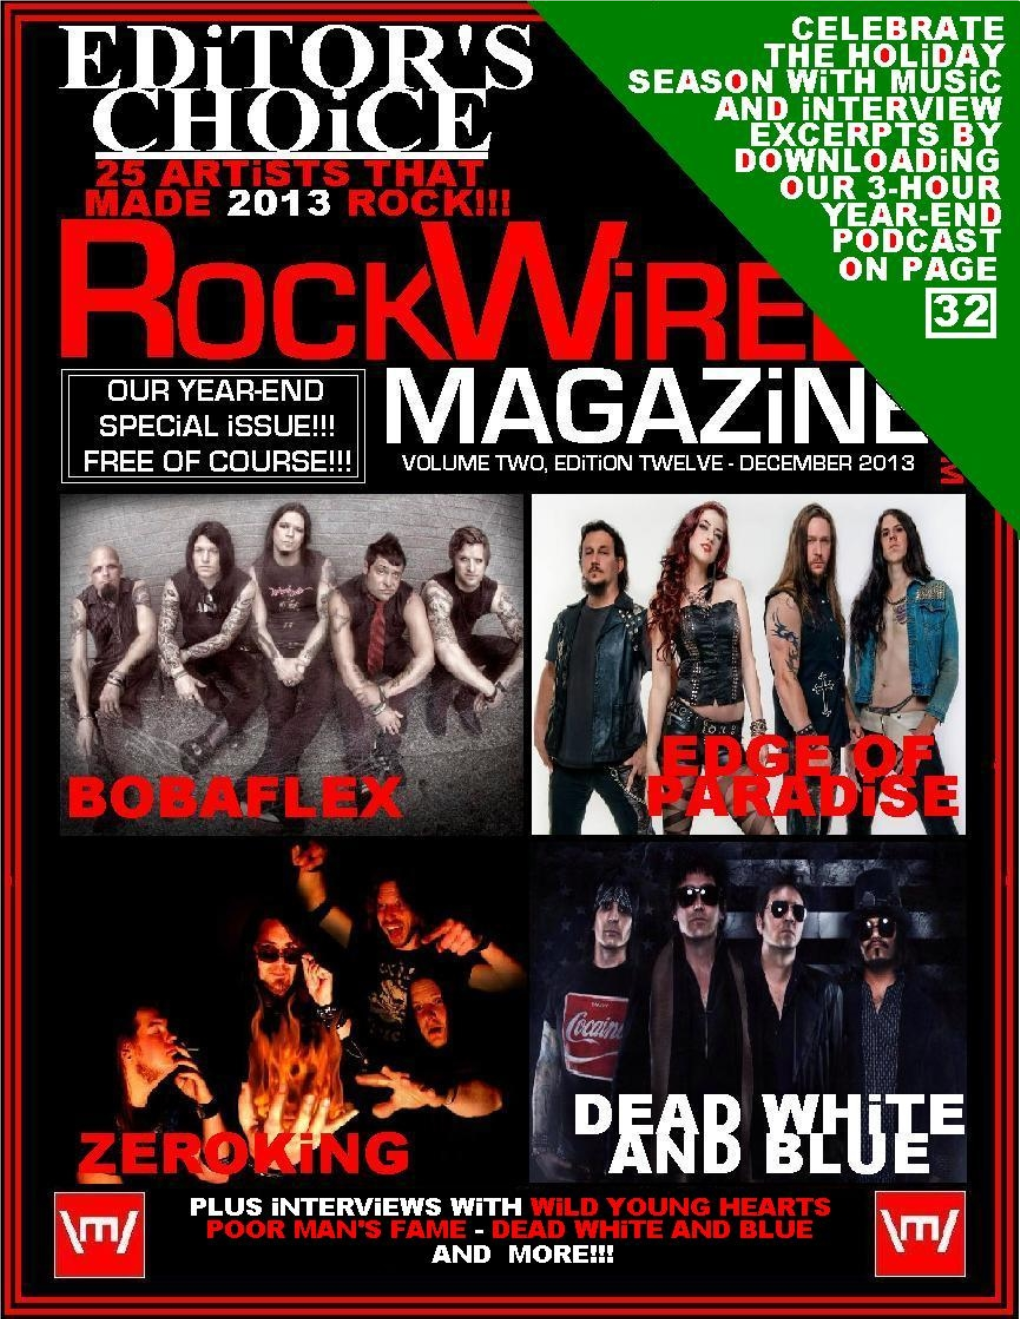 Rockwired Magazine – 2013 Editor's Choice DECEMBER